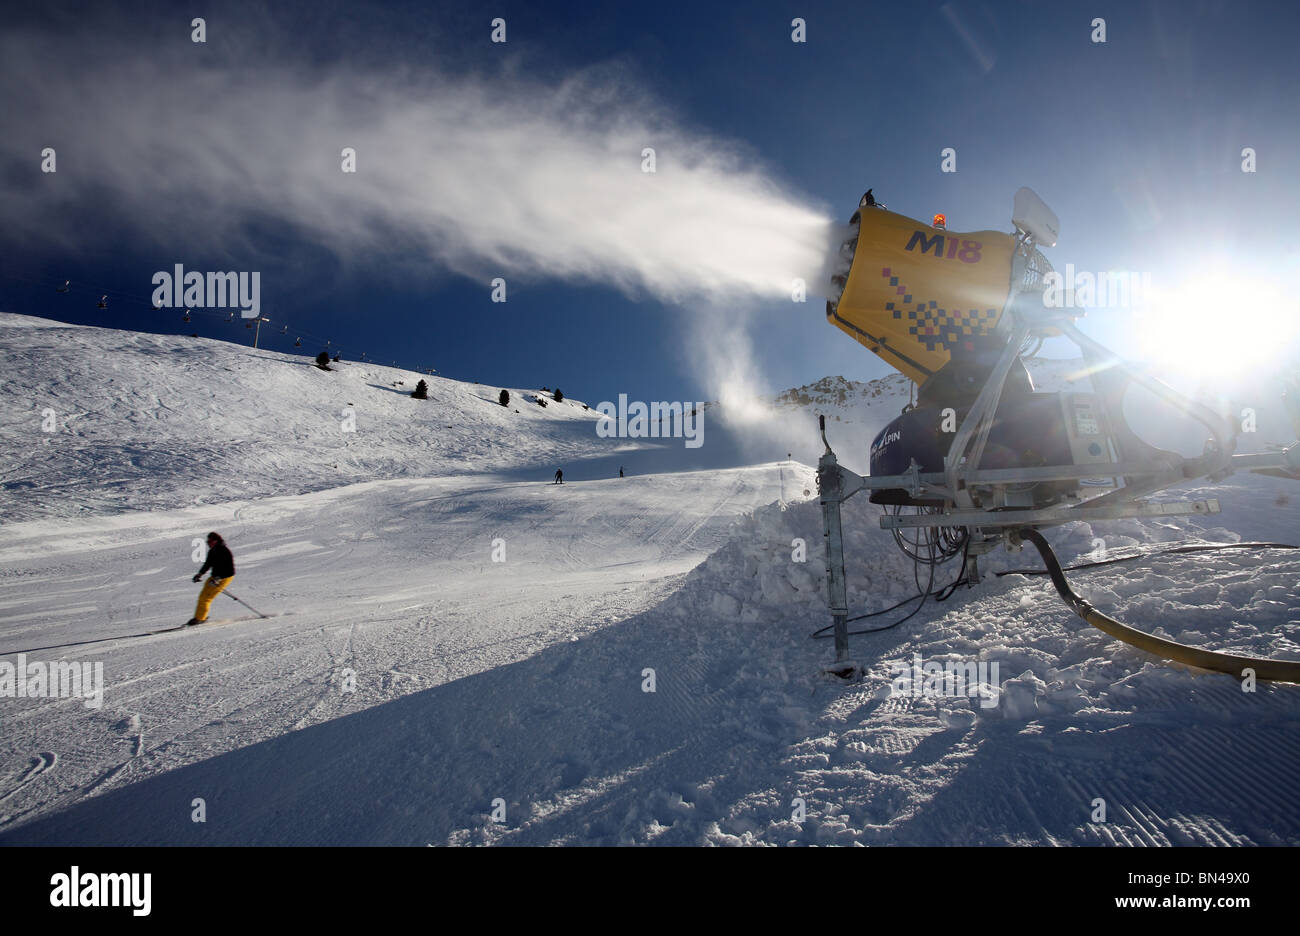 A snow cannon and skiers on the slope, Jerzens, Austria Stock Photo